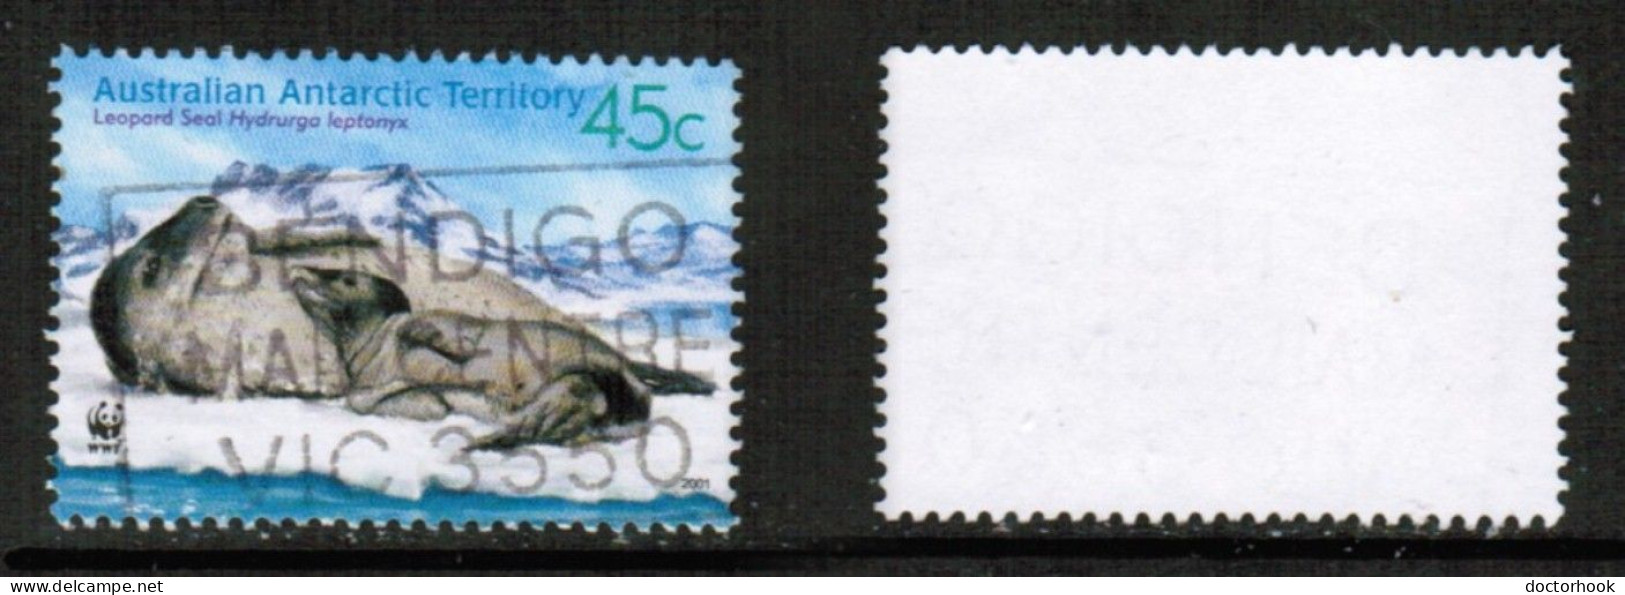 AUSTRALIAN ANTARCTIC TERRITORY   Scott # L 118a USED (CONDITION AS PER SCAN) (Stamp Scan # 930-11) - Used Stamps